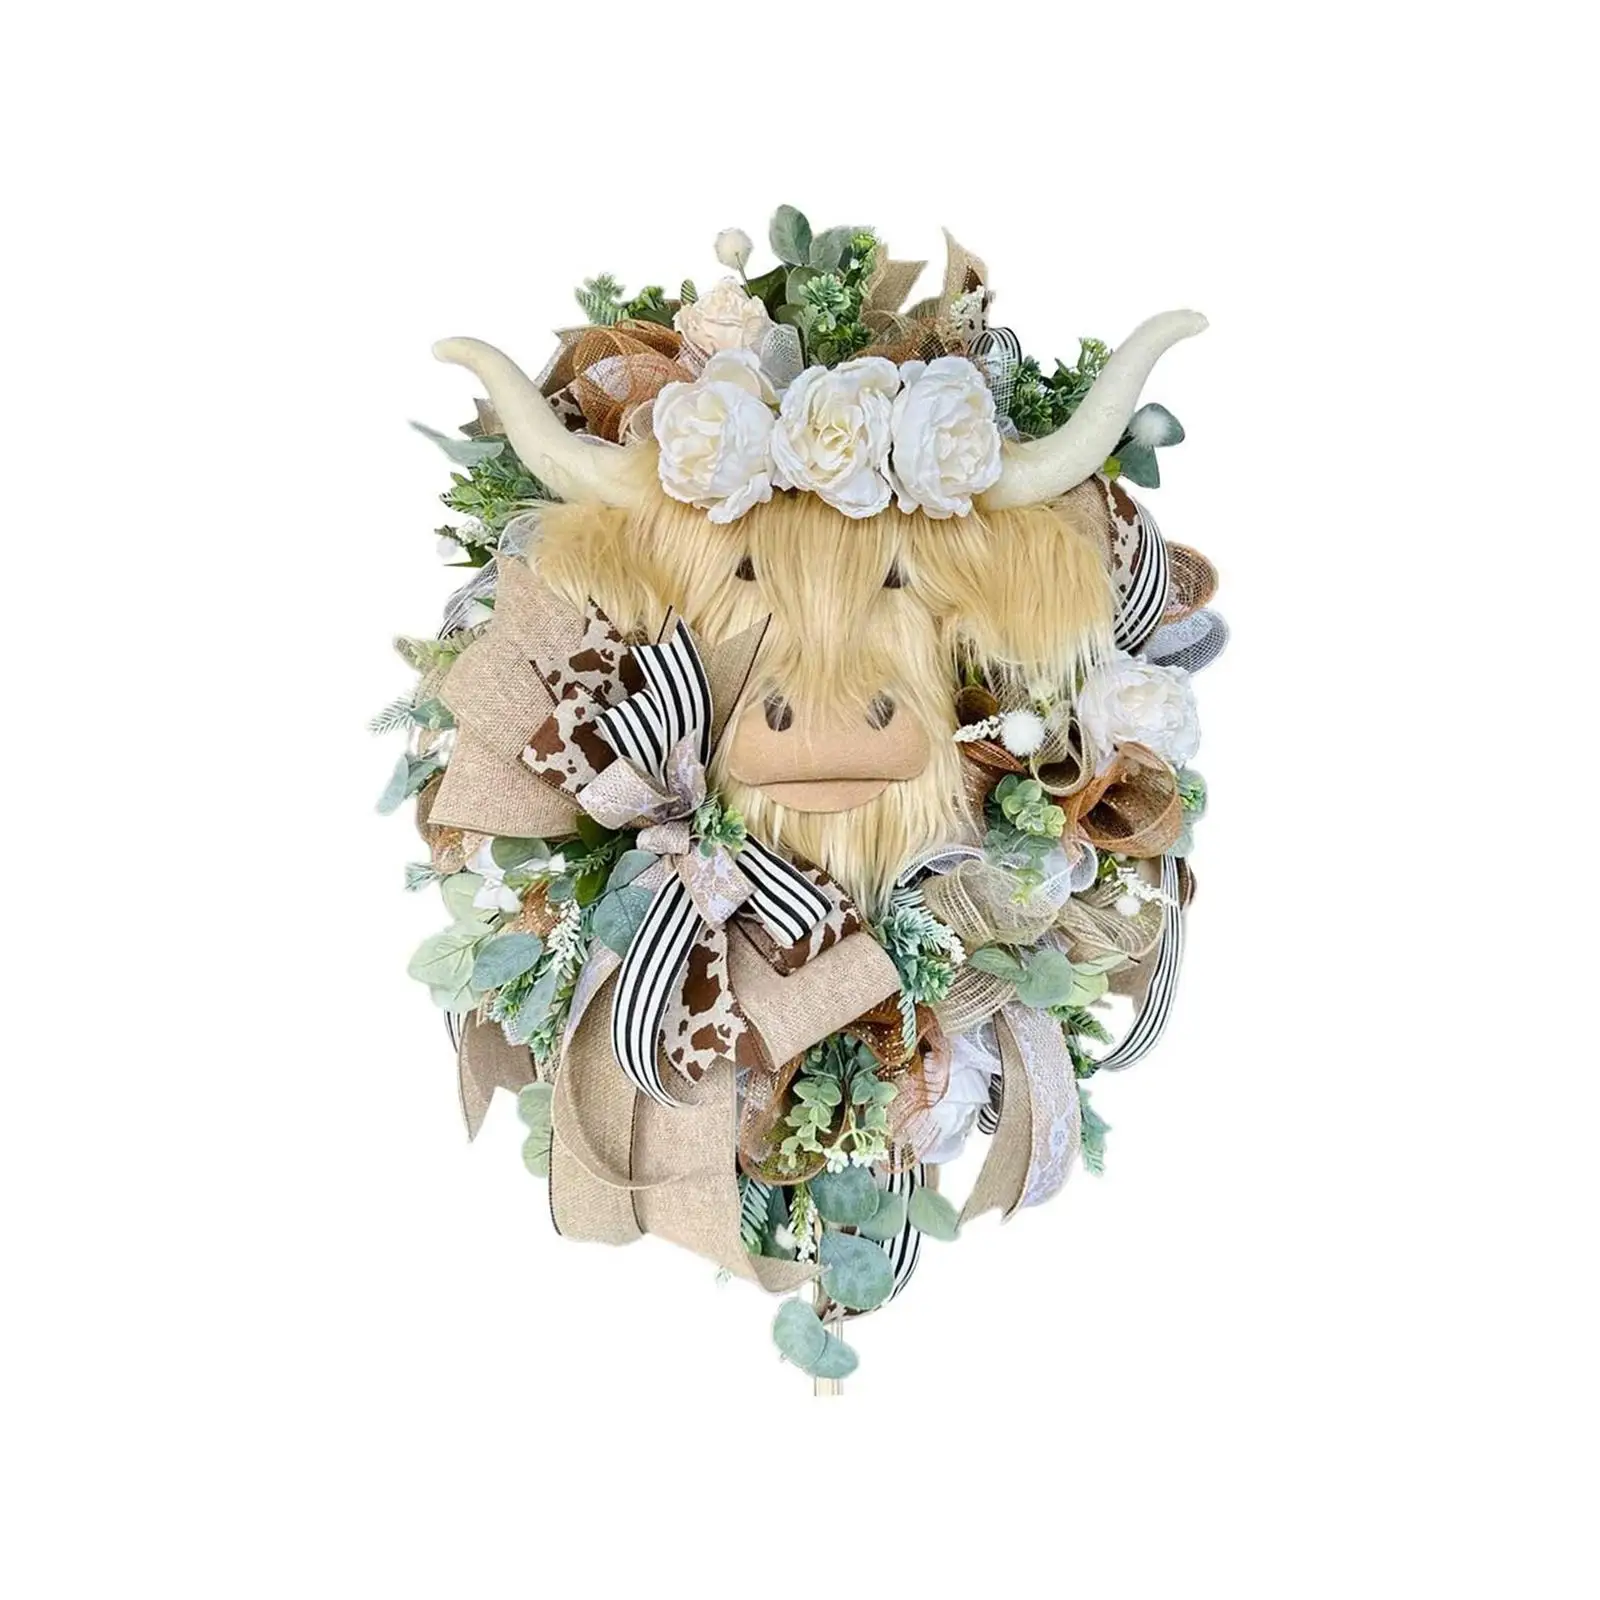 Highlands Cow Wreath Easter Spring Decor Wreath for Front Door Window Hanging Garland for Festival Fireplace Decoration